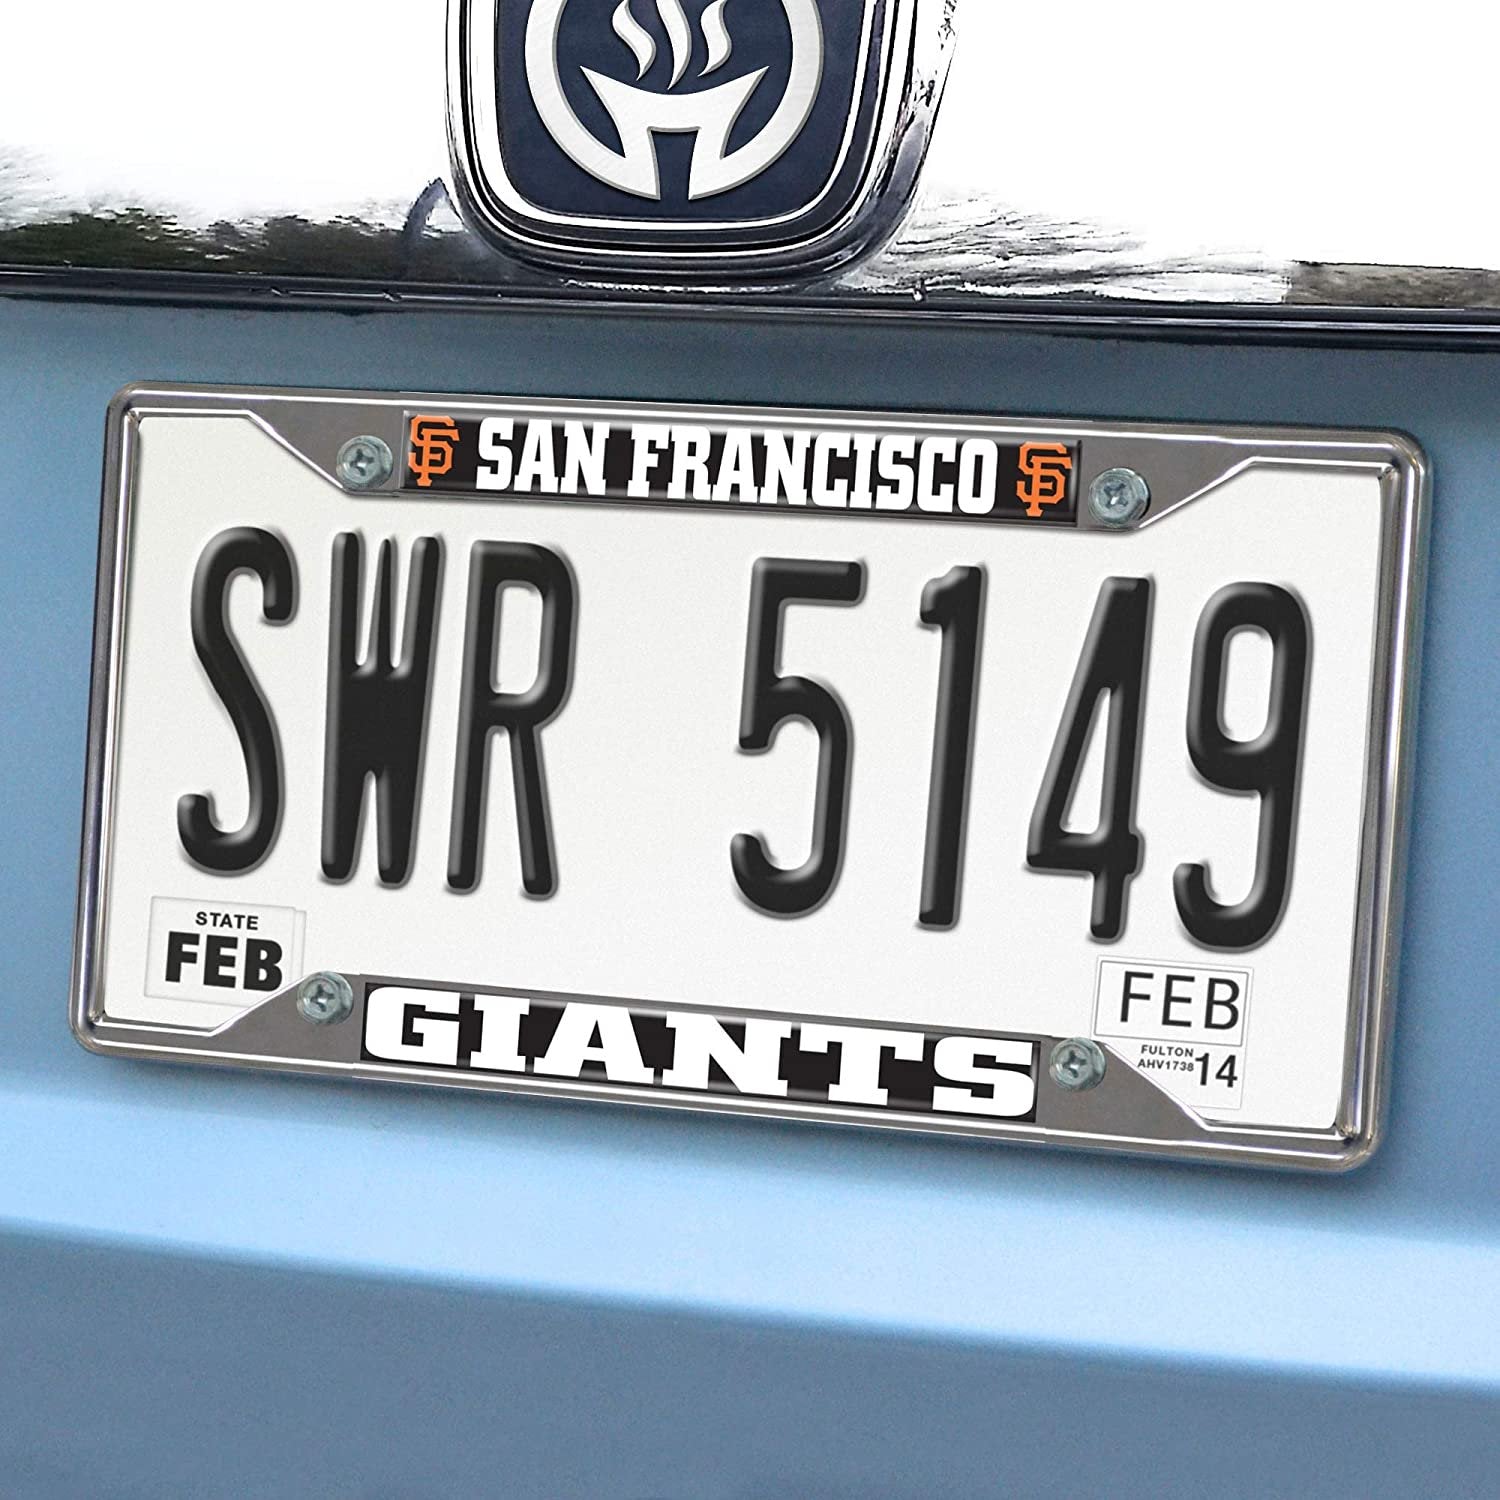 San Francisco Giants Metal License Plate Frame Tag Cover Chrome 6x12 Inch